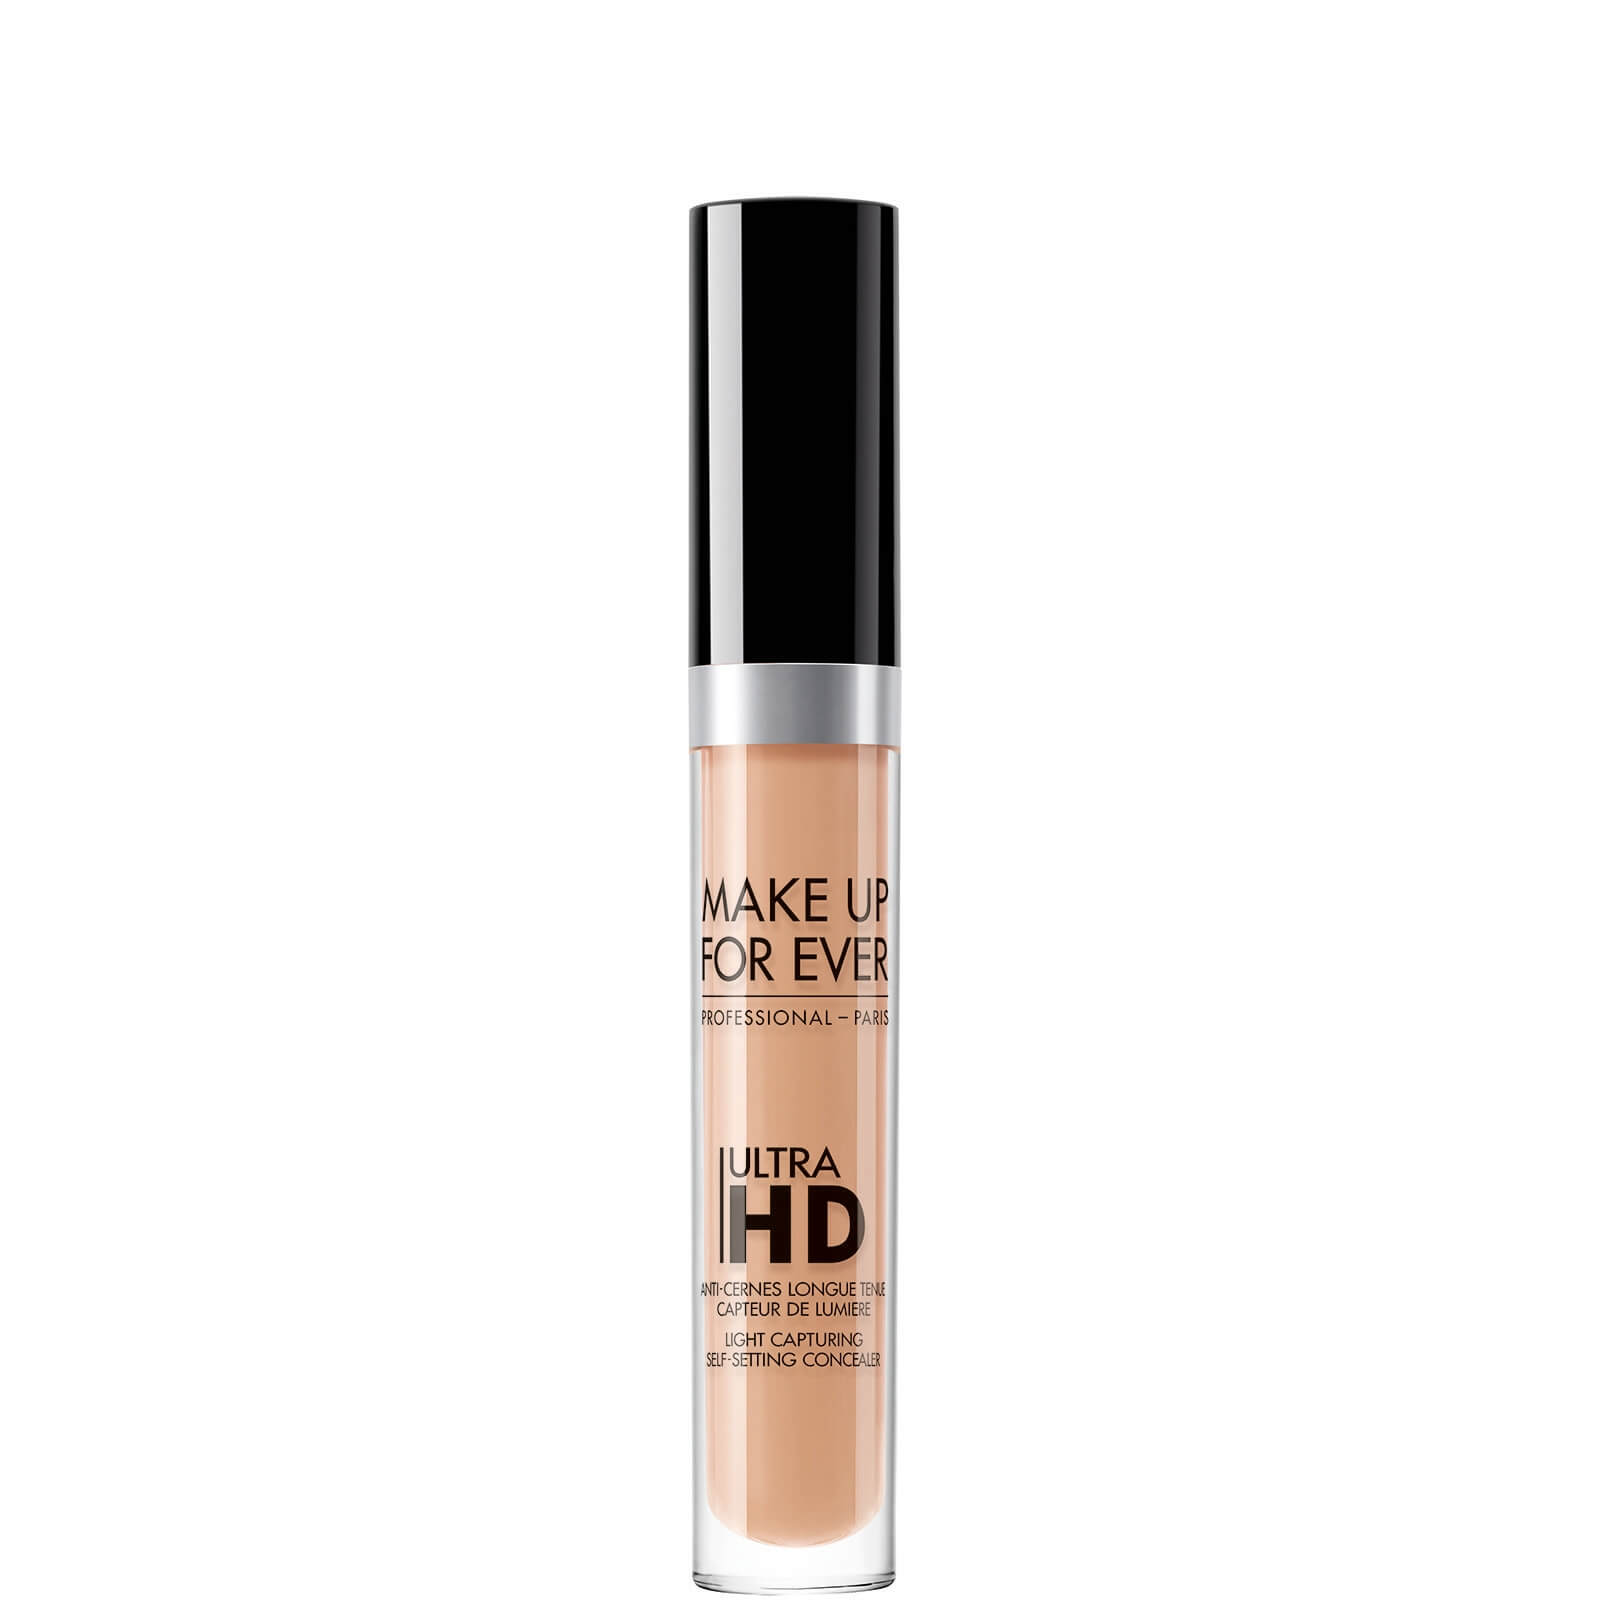 MAKE UP FOR EVER ultra Hd Self-Setting Concealer 5ml (Various Shades) - - 33 Desert